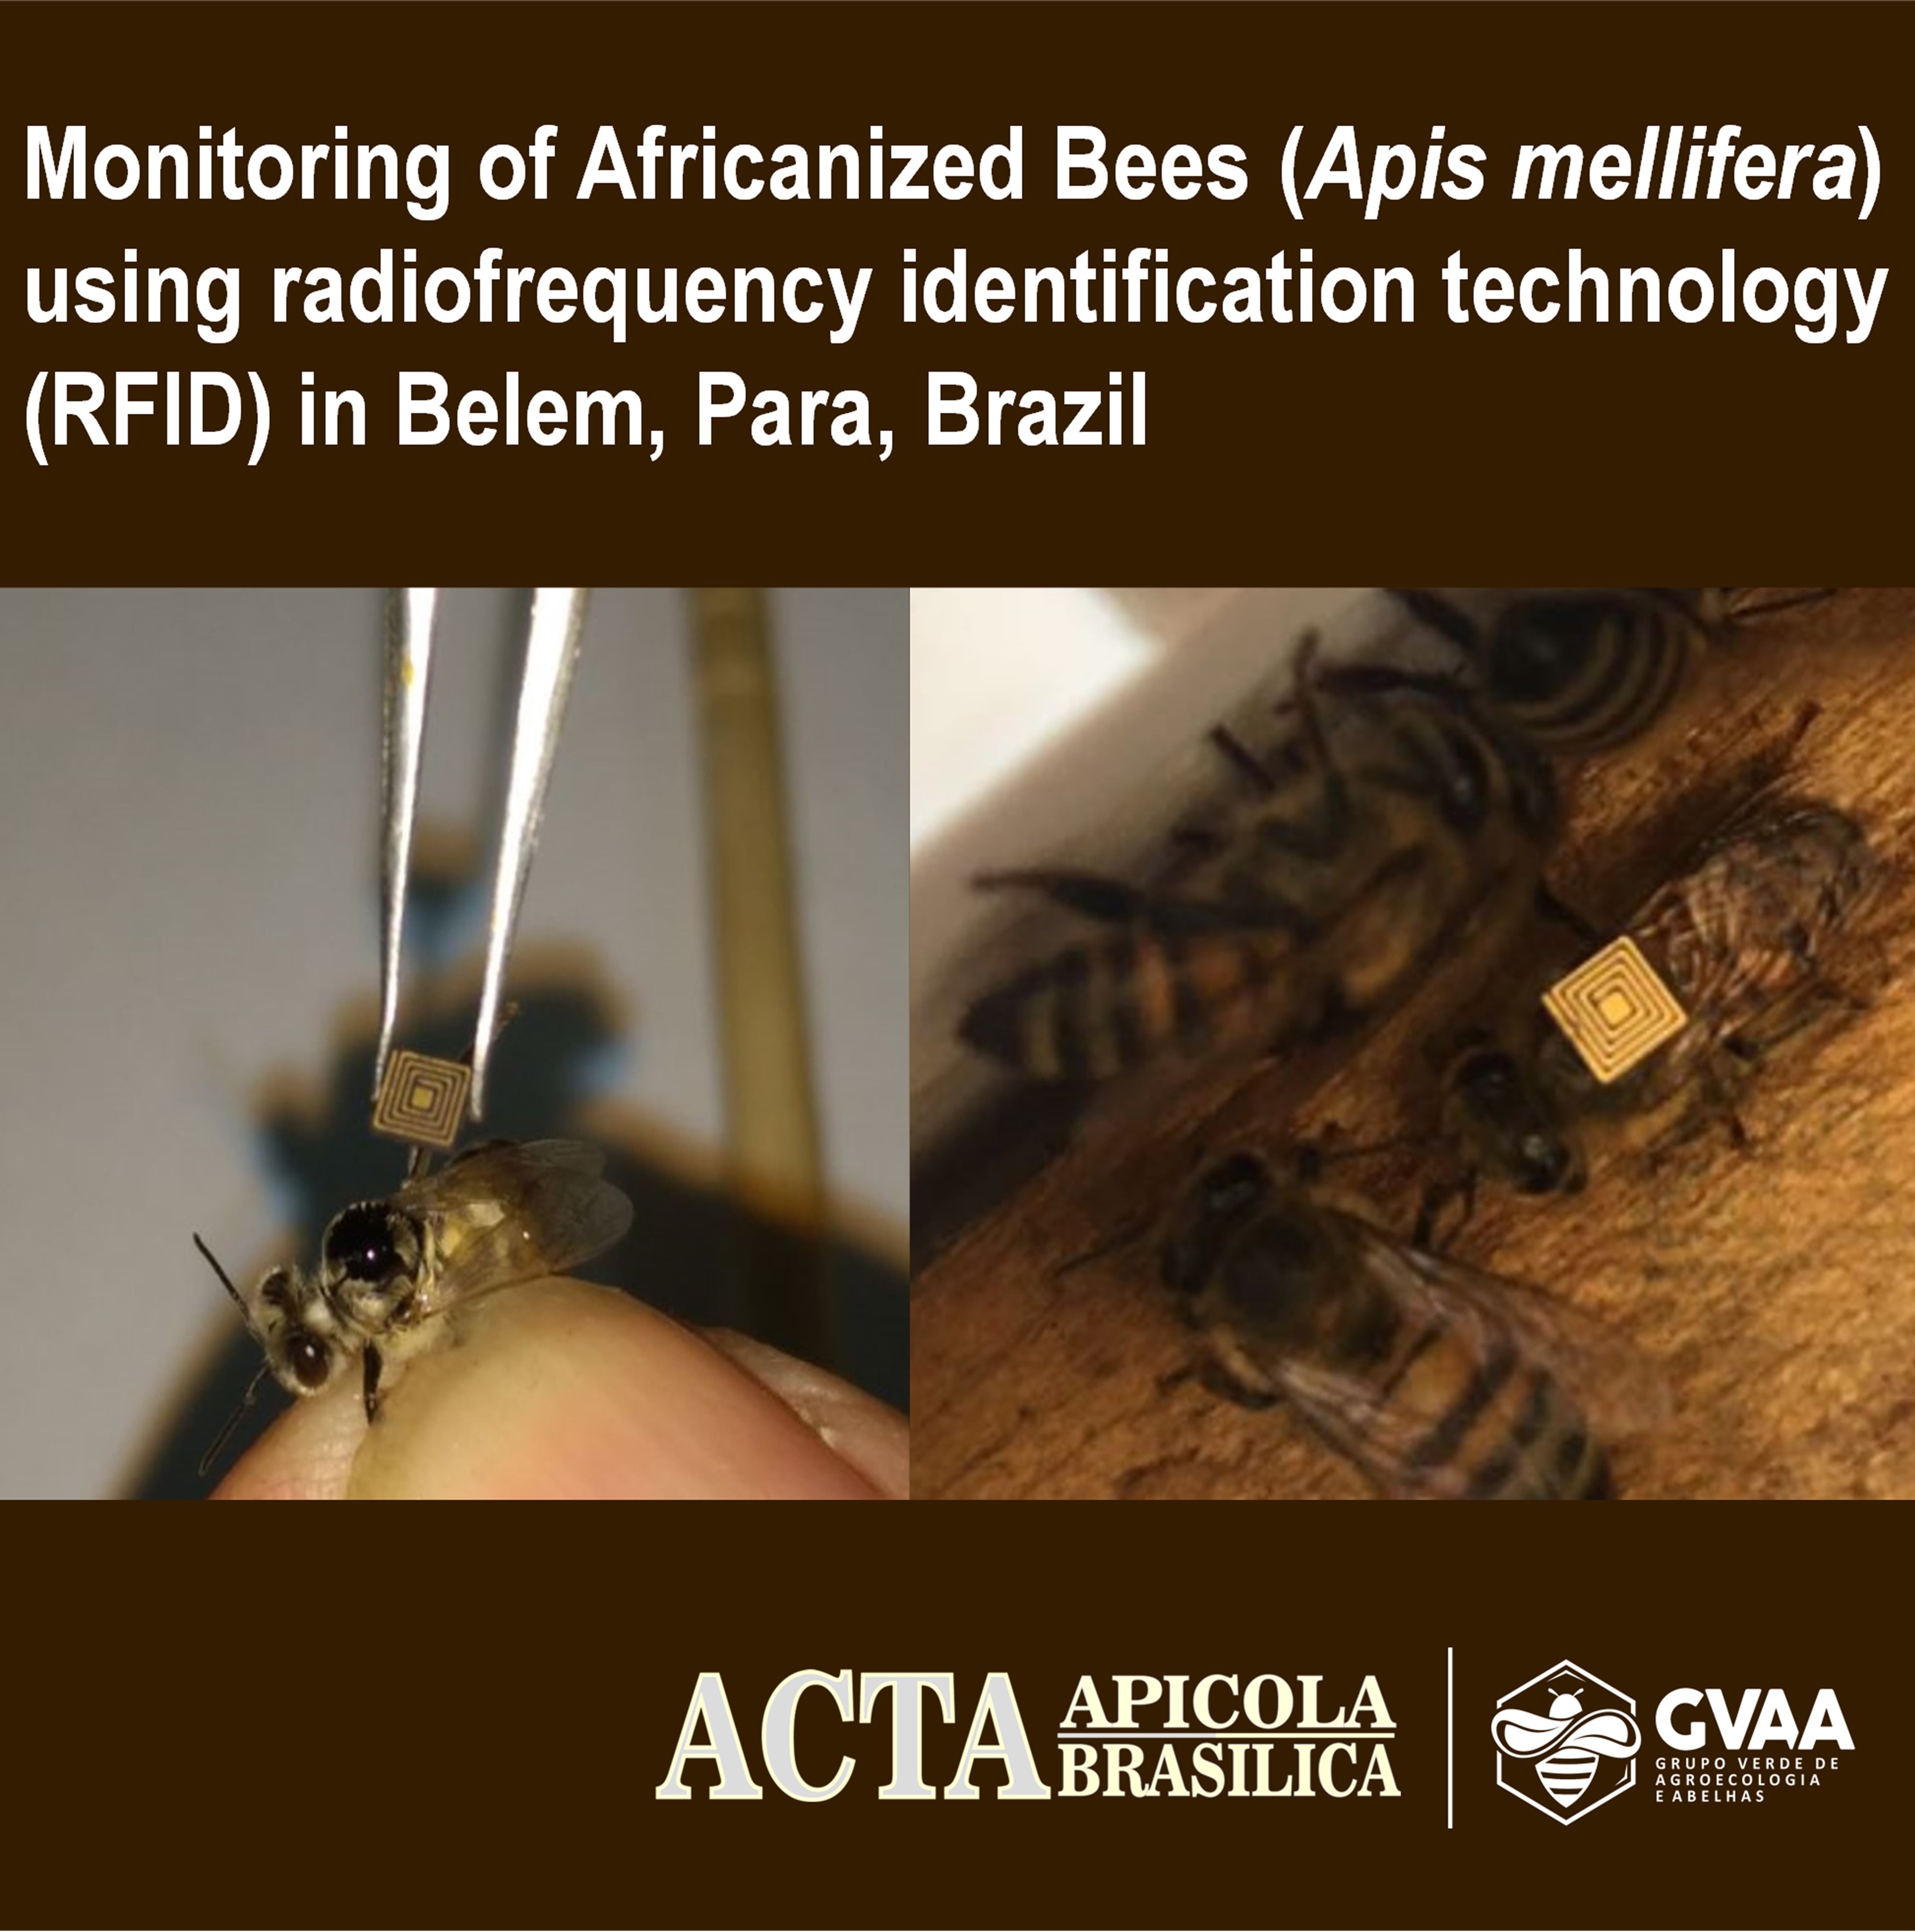 Monitoring of Africanized Bees (Apis mellifera L.) using radiofrequency identification technology (RFID) in Belem, Para, Brazil